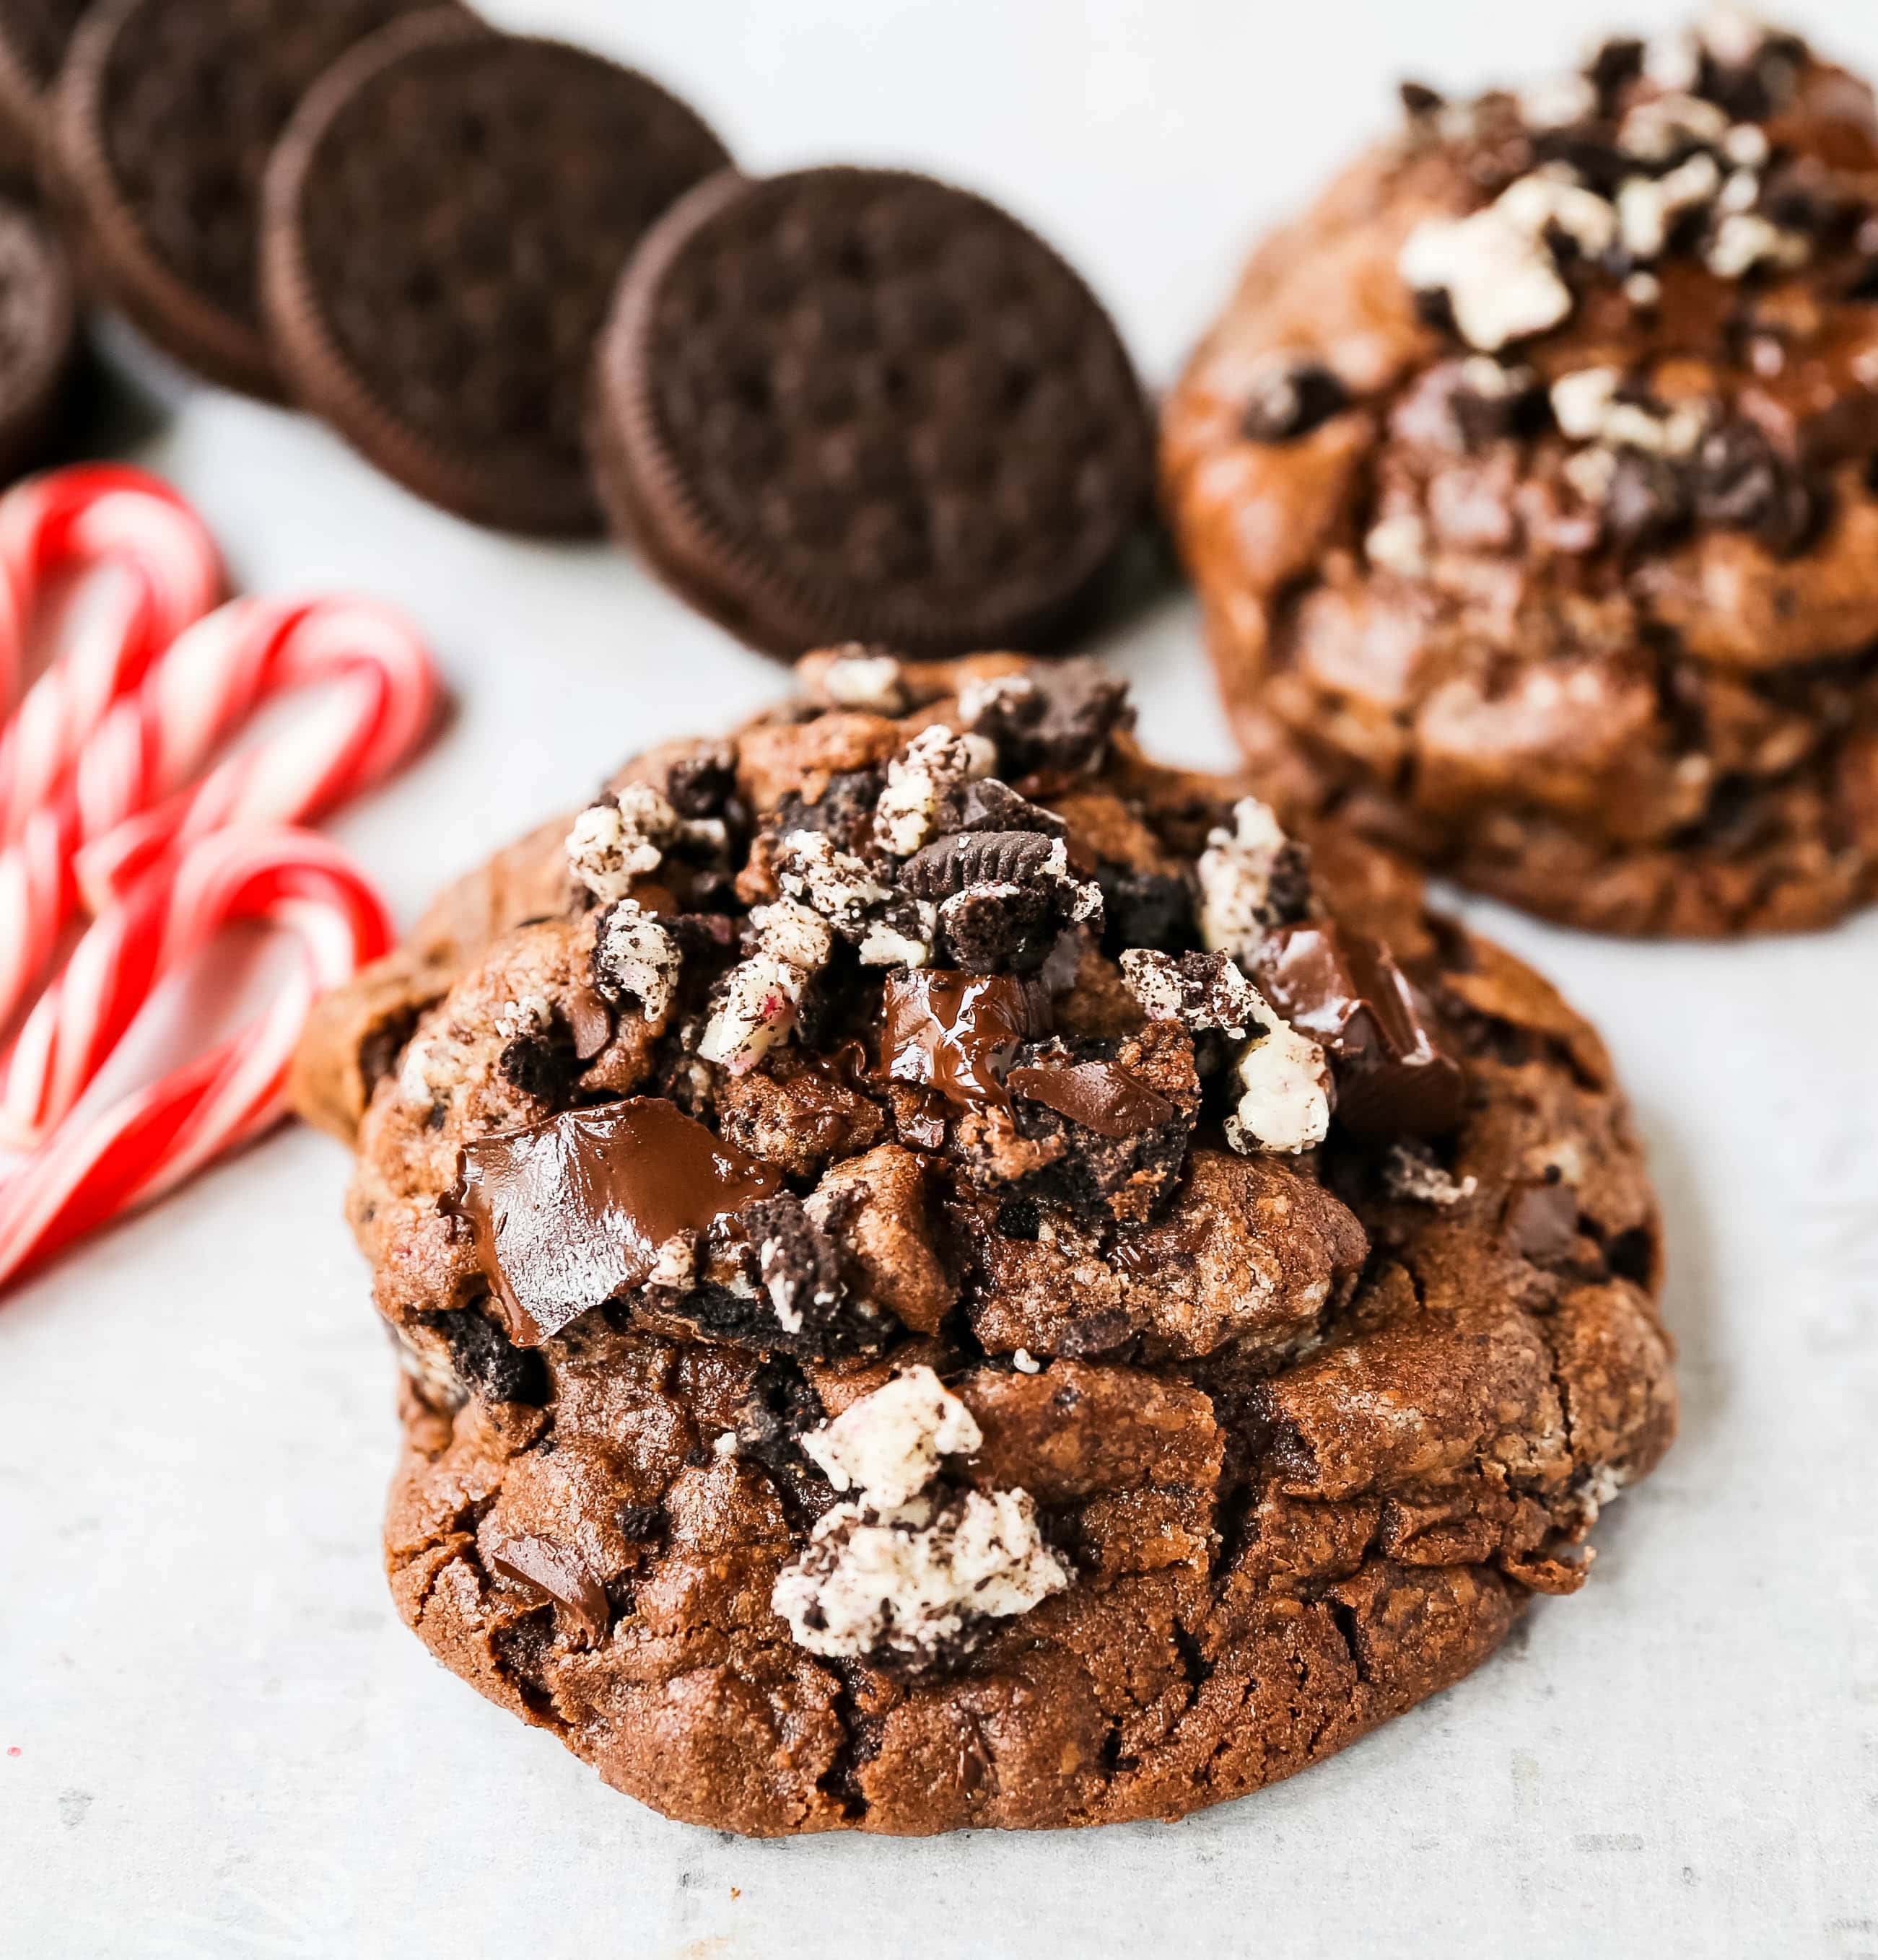 Chocolate Peppermint Candy Cane Oreo Cookies.  The best chocolate peppermint cookies. Double chocolate cookies with Trader Joe's famous candy cane Joe Joe's Oreo cookies. www.modernhoney.com #chocolatecookies #chocolatepeppermint #chocolatemint #christmas #christmascookies #candycanes 